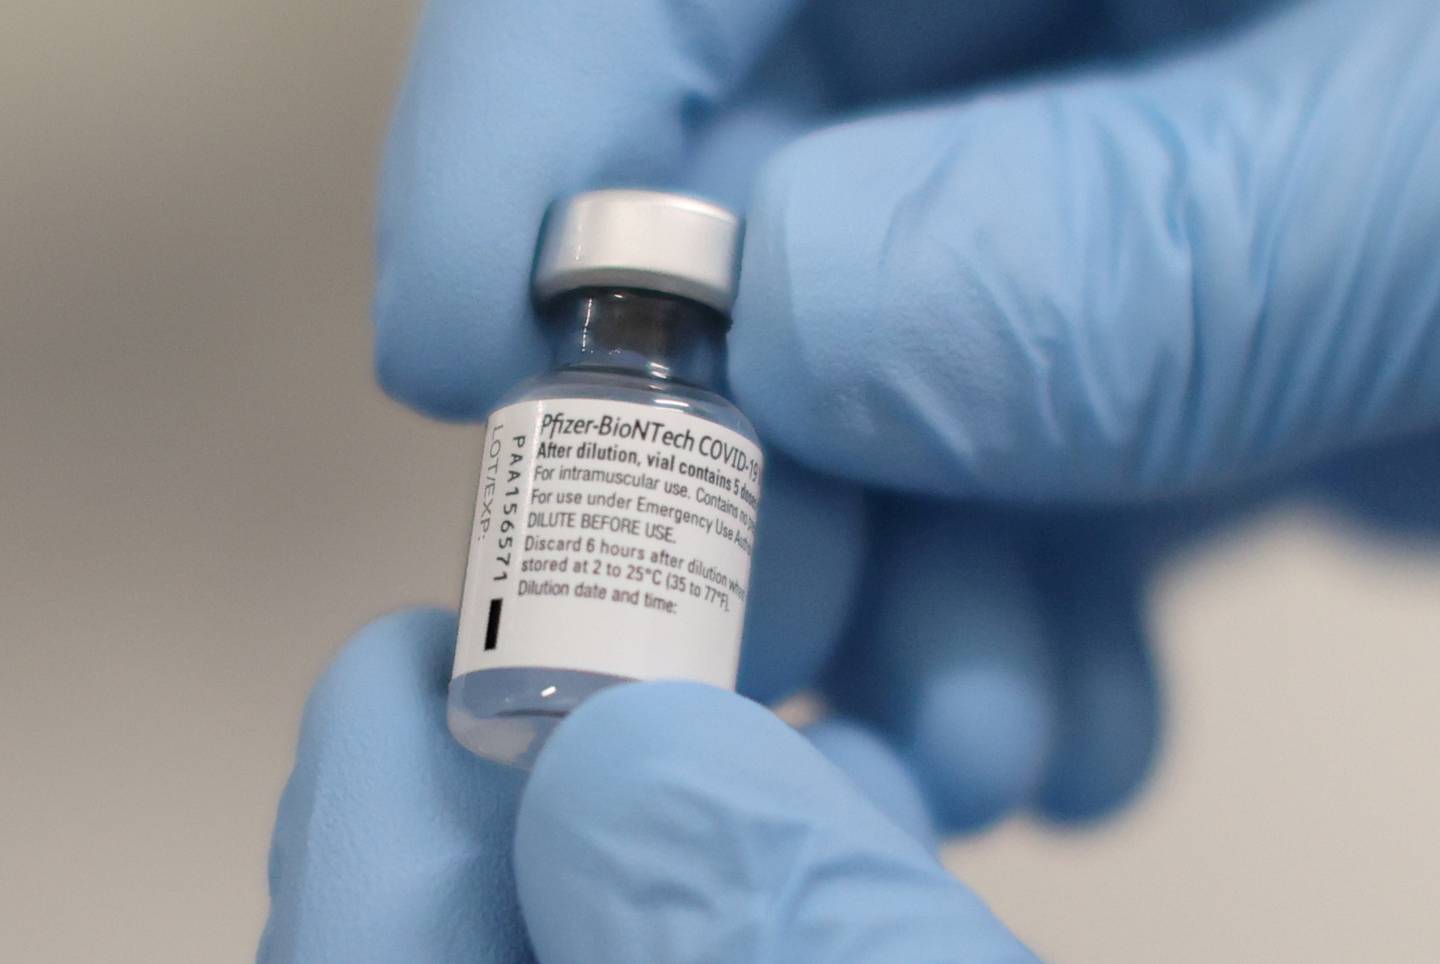 FILE PHOTO: A vial of the Pfizer/BioNTech COVID-19 vaccine is seen before being administered at the Royal Victoria Hospital in Belfast, Northern Ireland December 8, 2020. Liam McBurney/Pool via REUTERS/File Photo